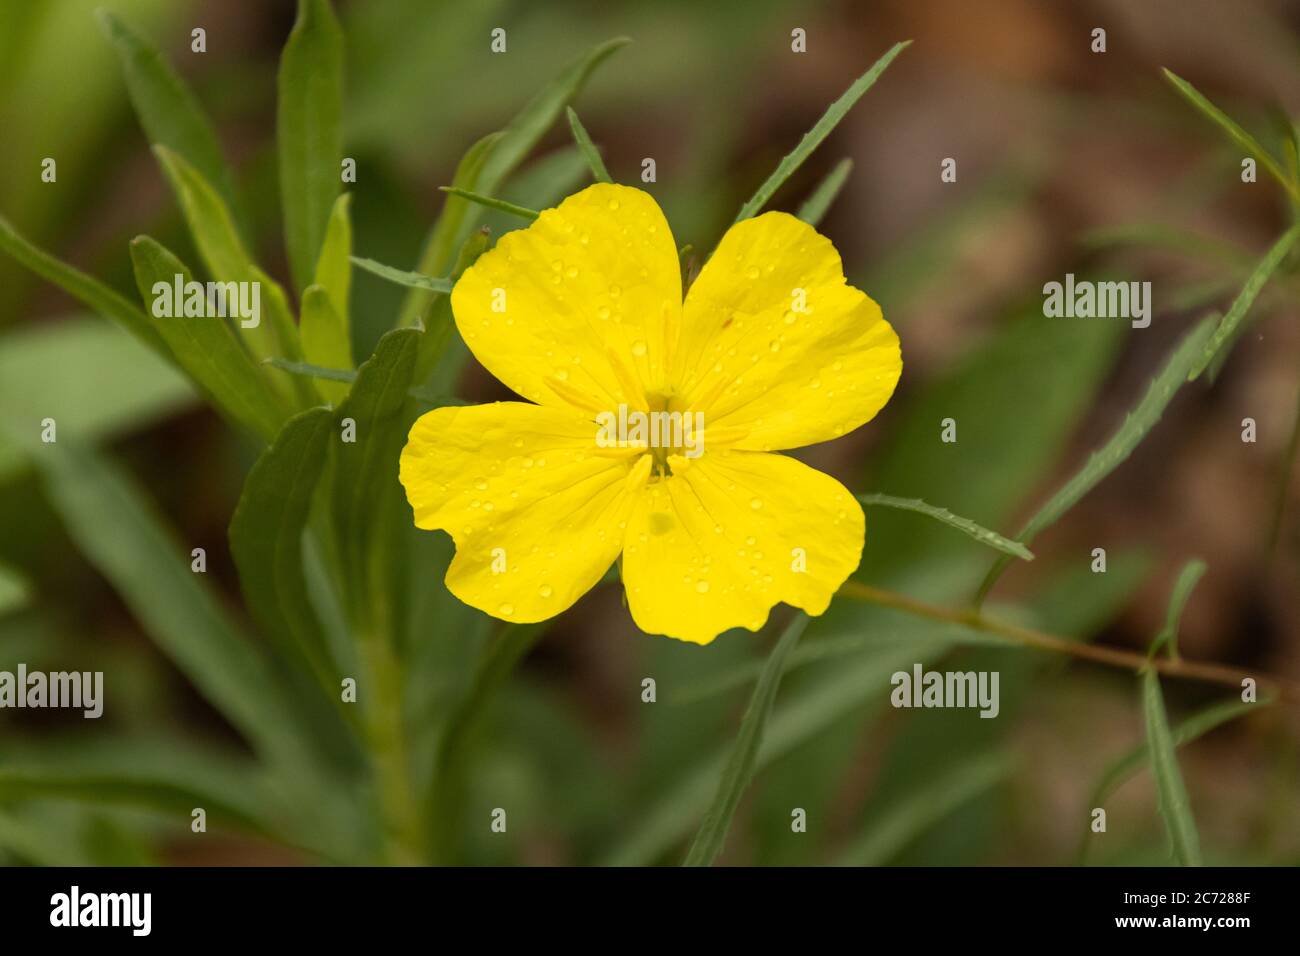 Closeup of a single yellow Square-bud Primrose wildflower with water drops on it Stock Photo